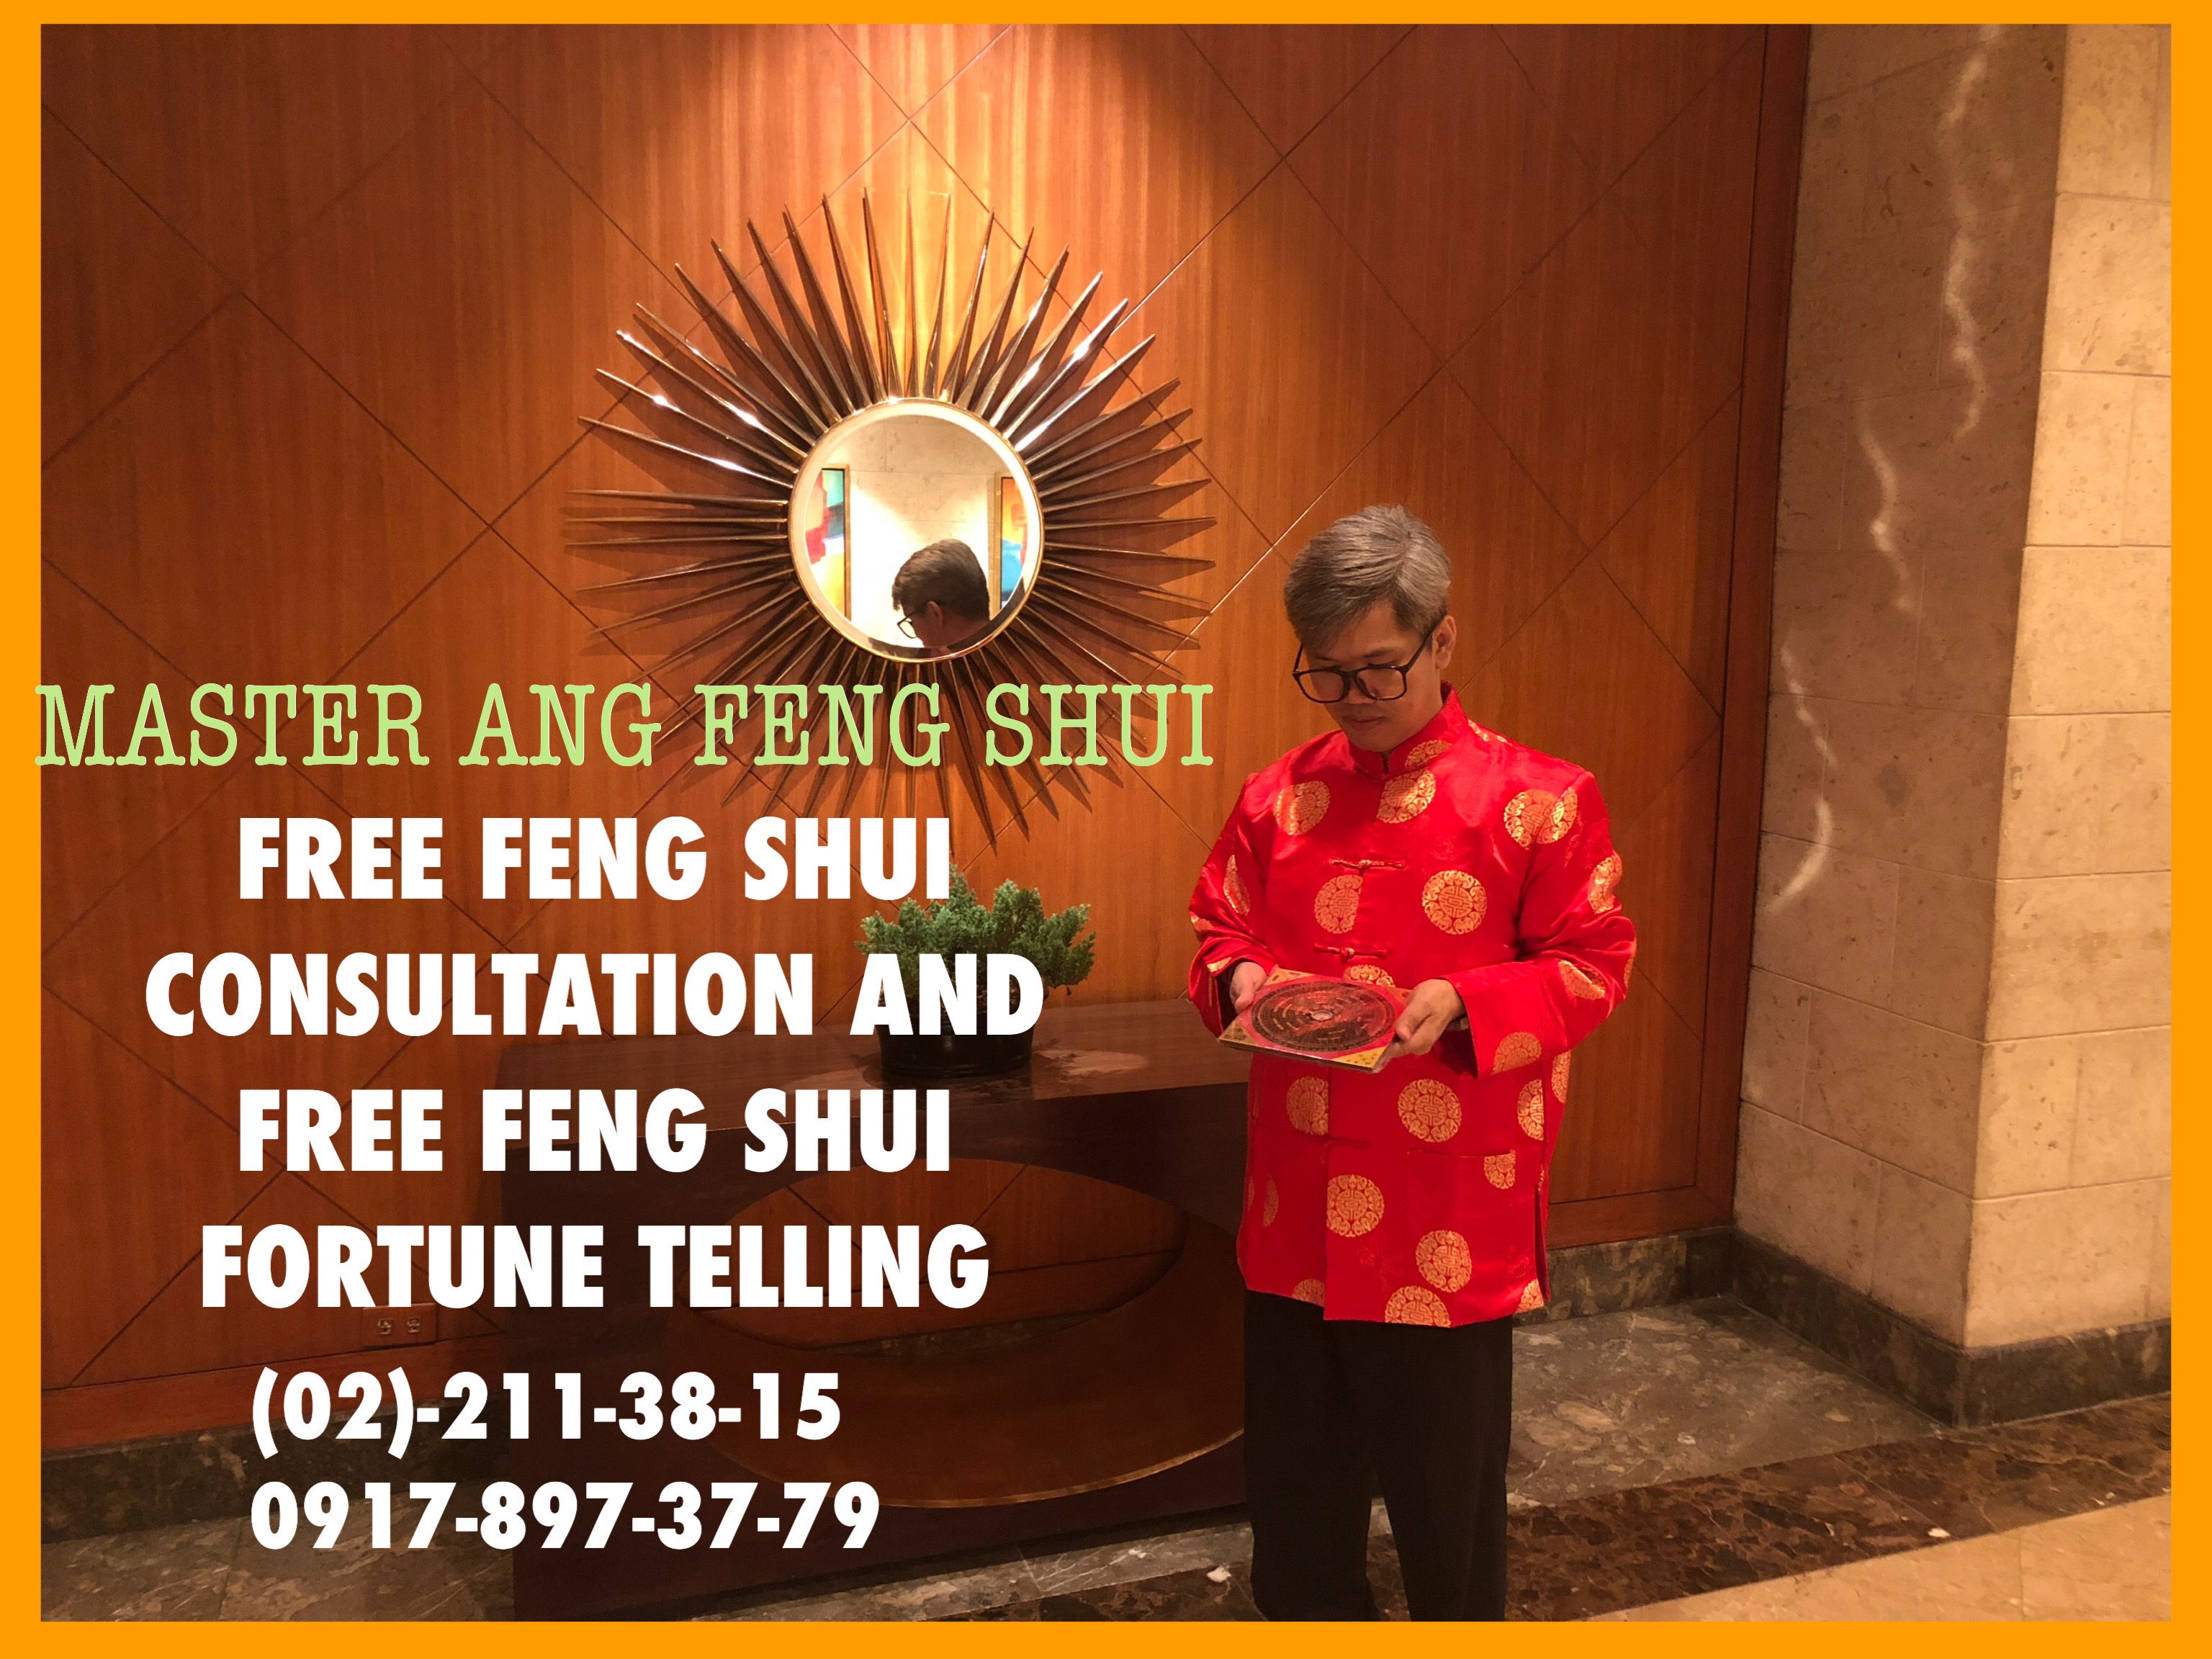 MASTER FENG SHUI ANG FREE FACE READING CONSULTATION